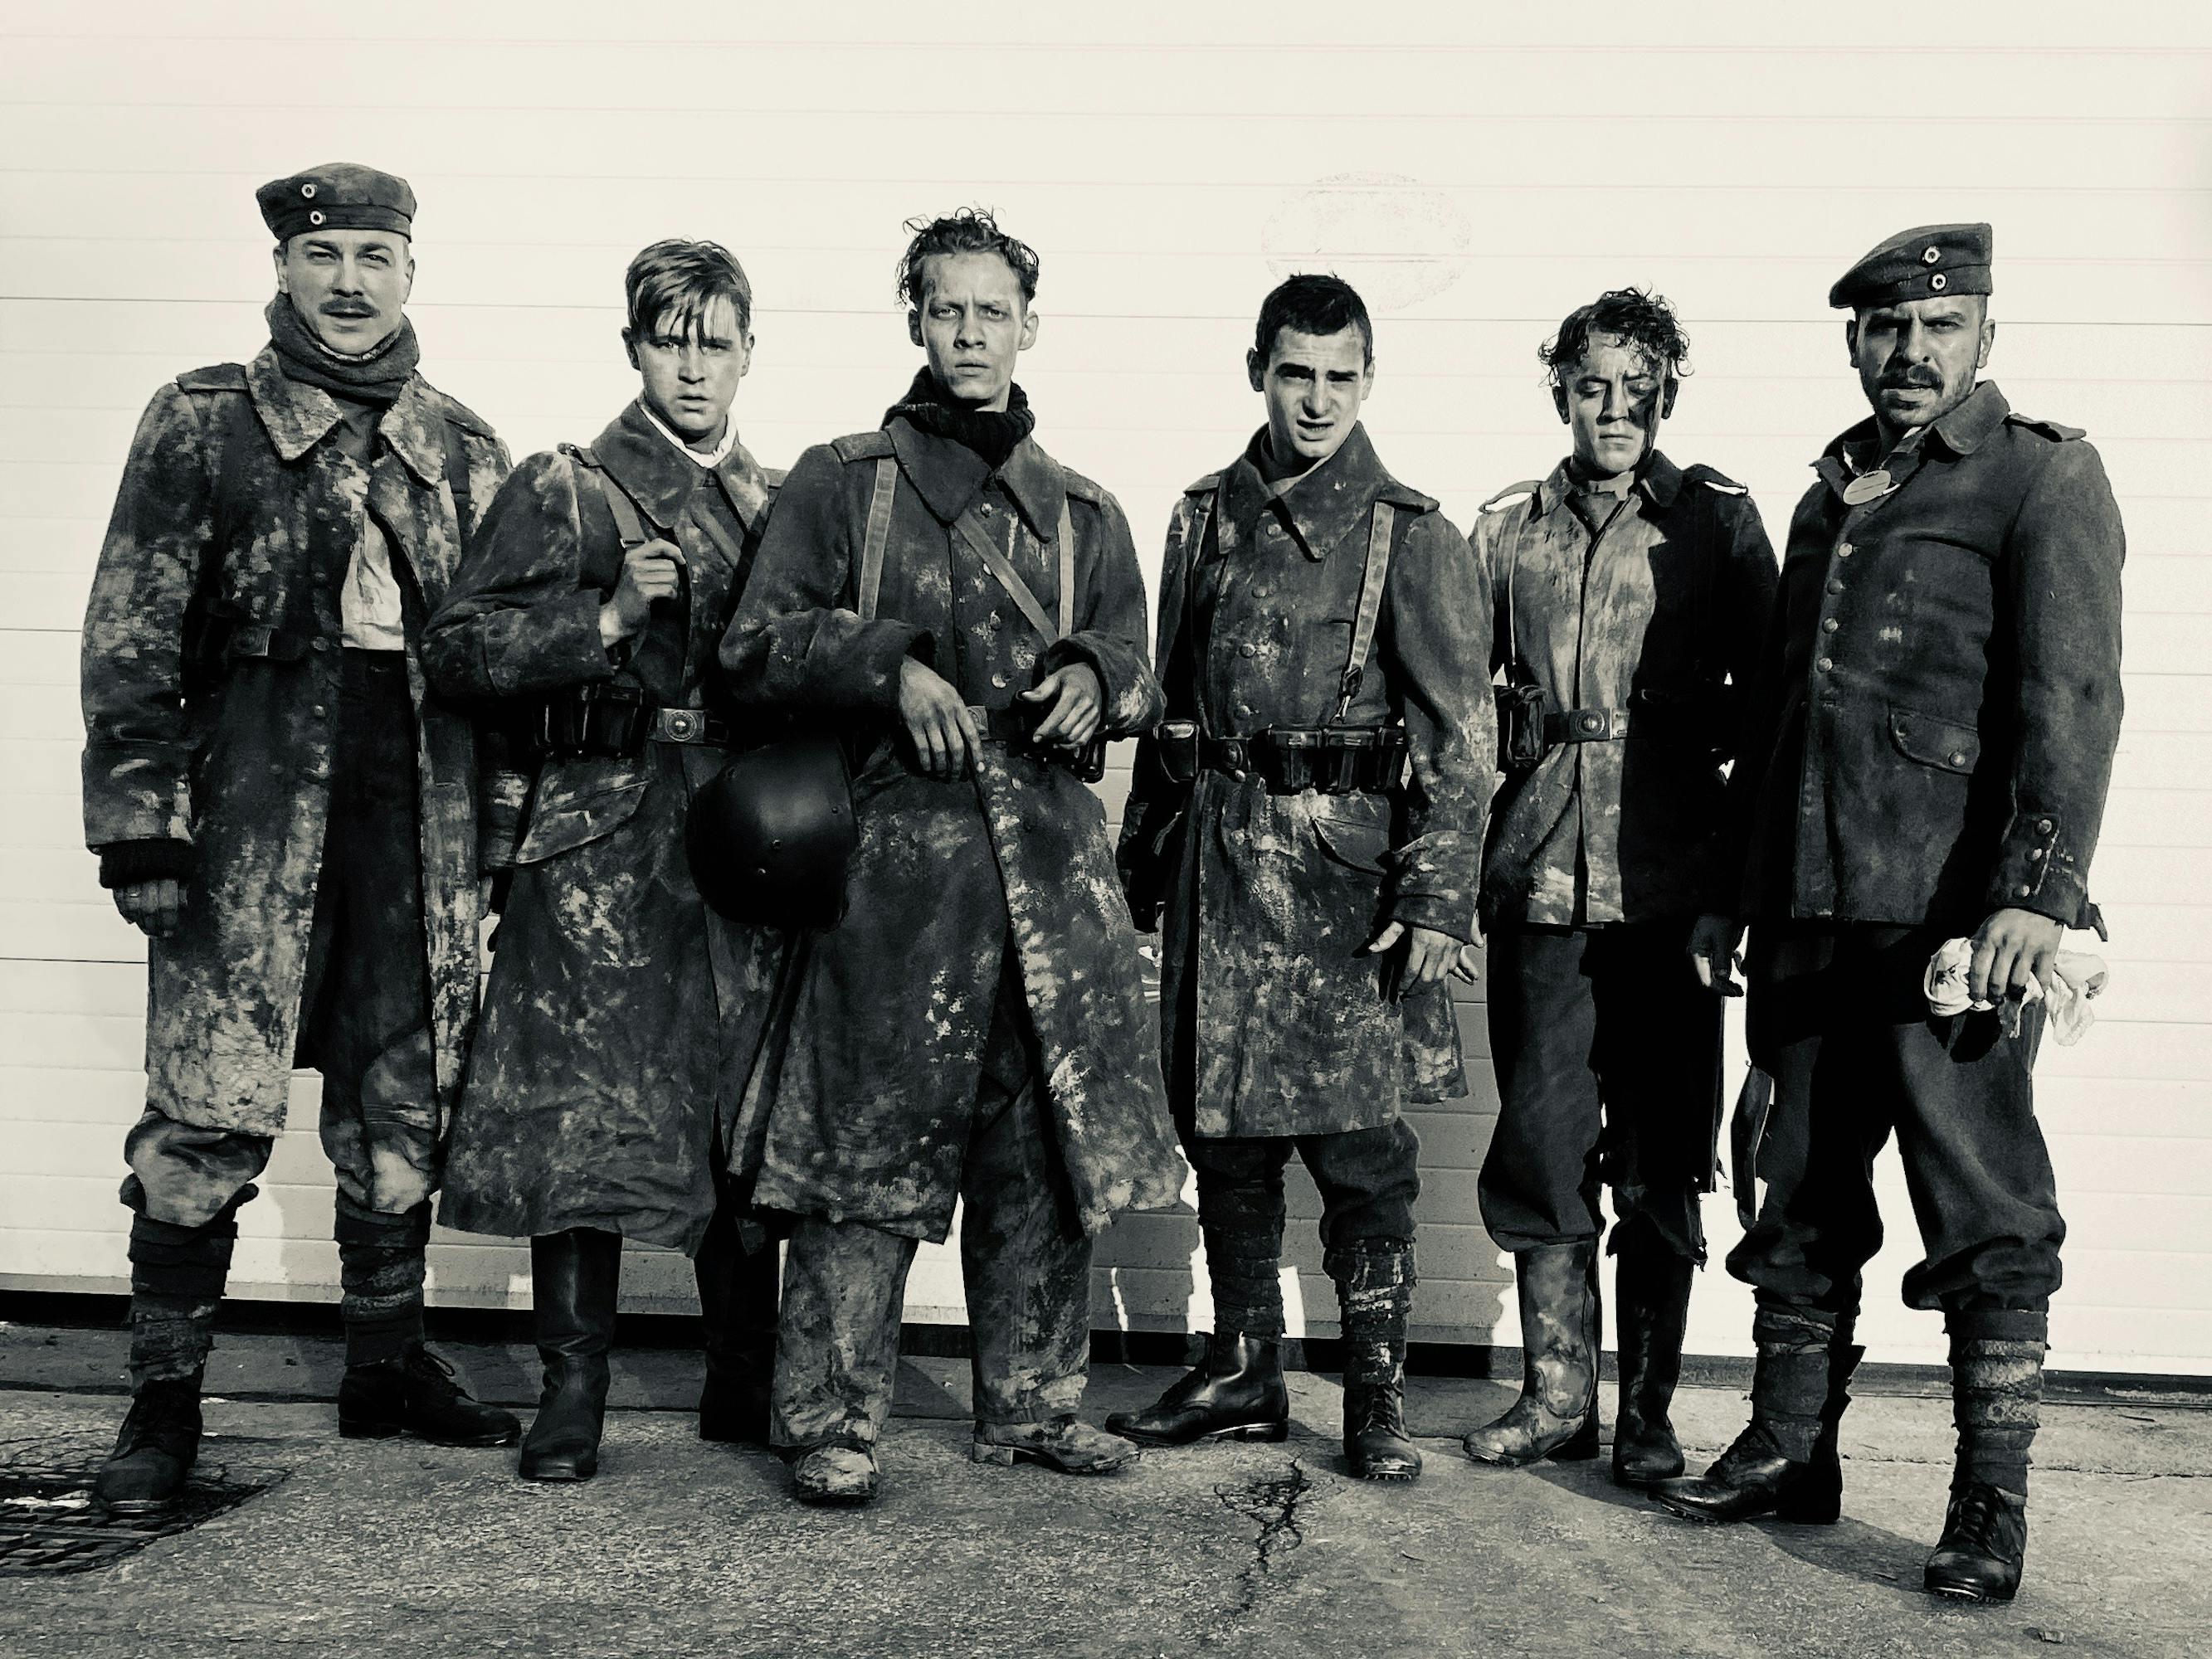 A line of soldiers stand together against a white wall. Their uniforms are muddied.